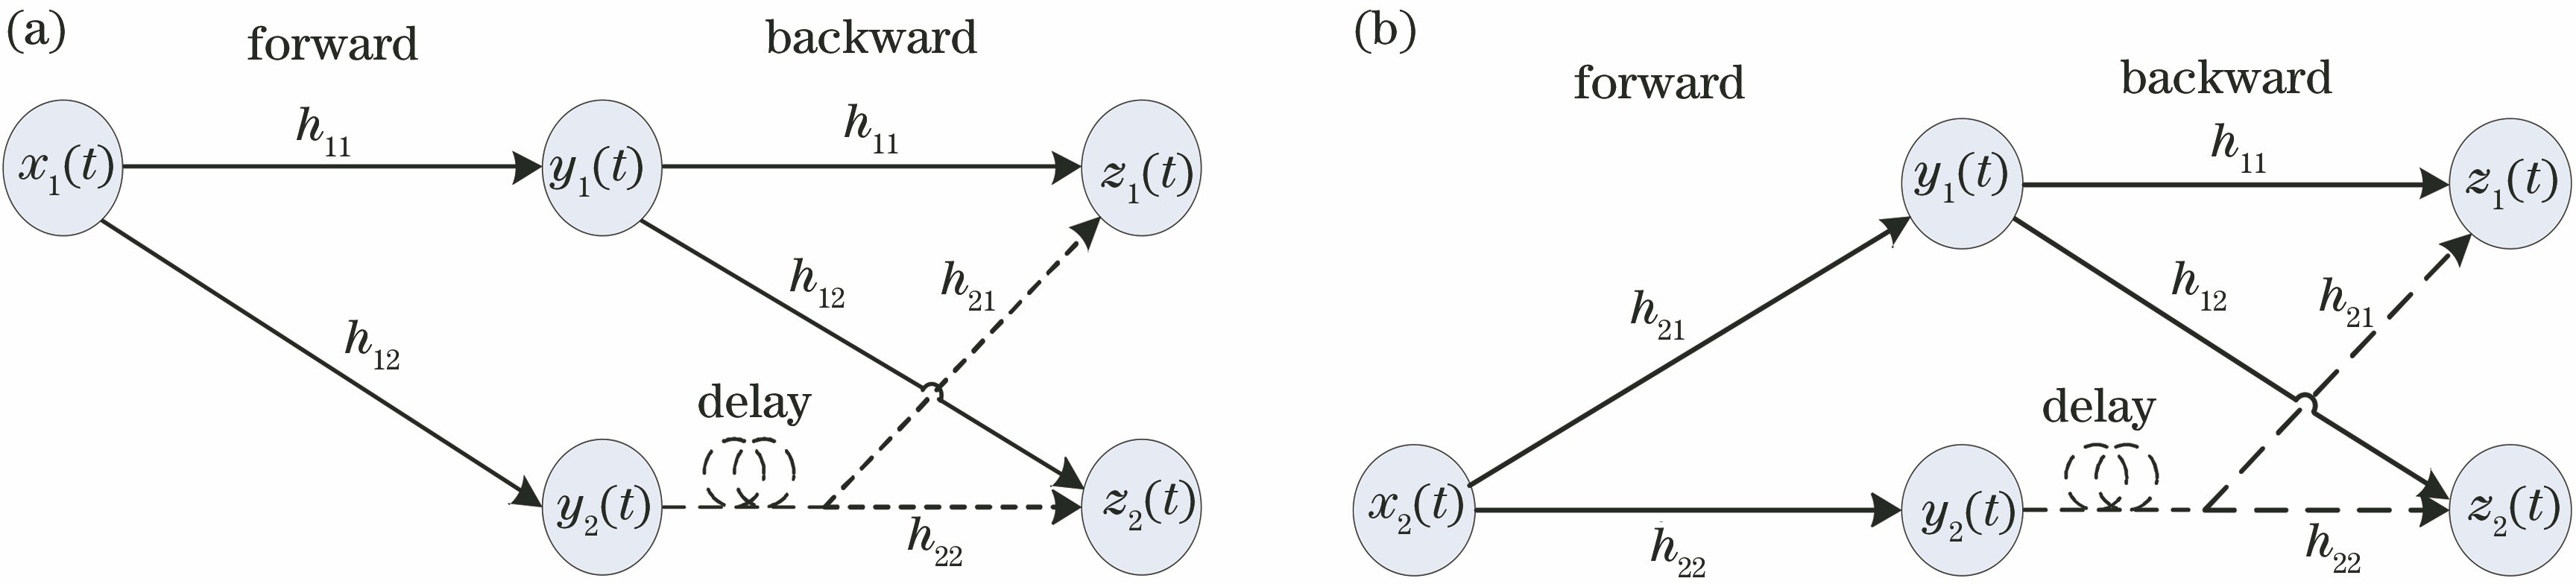 Diagram of a signal transfer path represented by the round-trip transmission matrix. (a) Signal path for the training signal x1(t) only; (b) signal path for the training signal x2(t) only